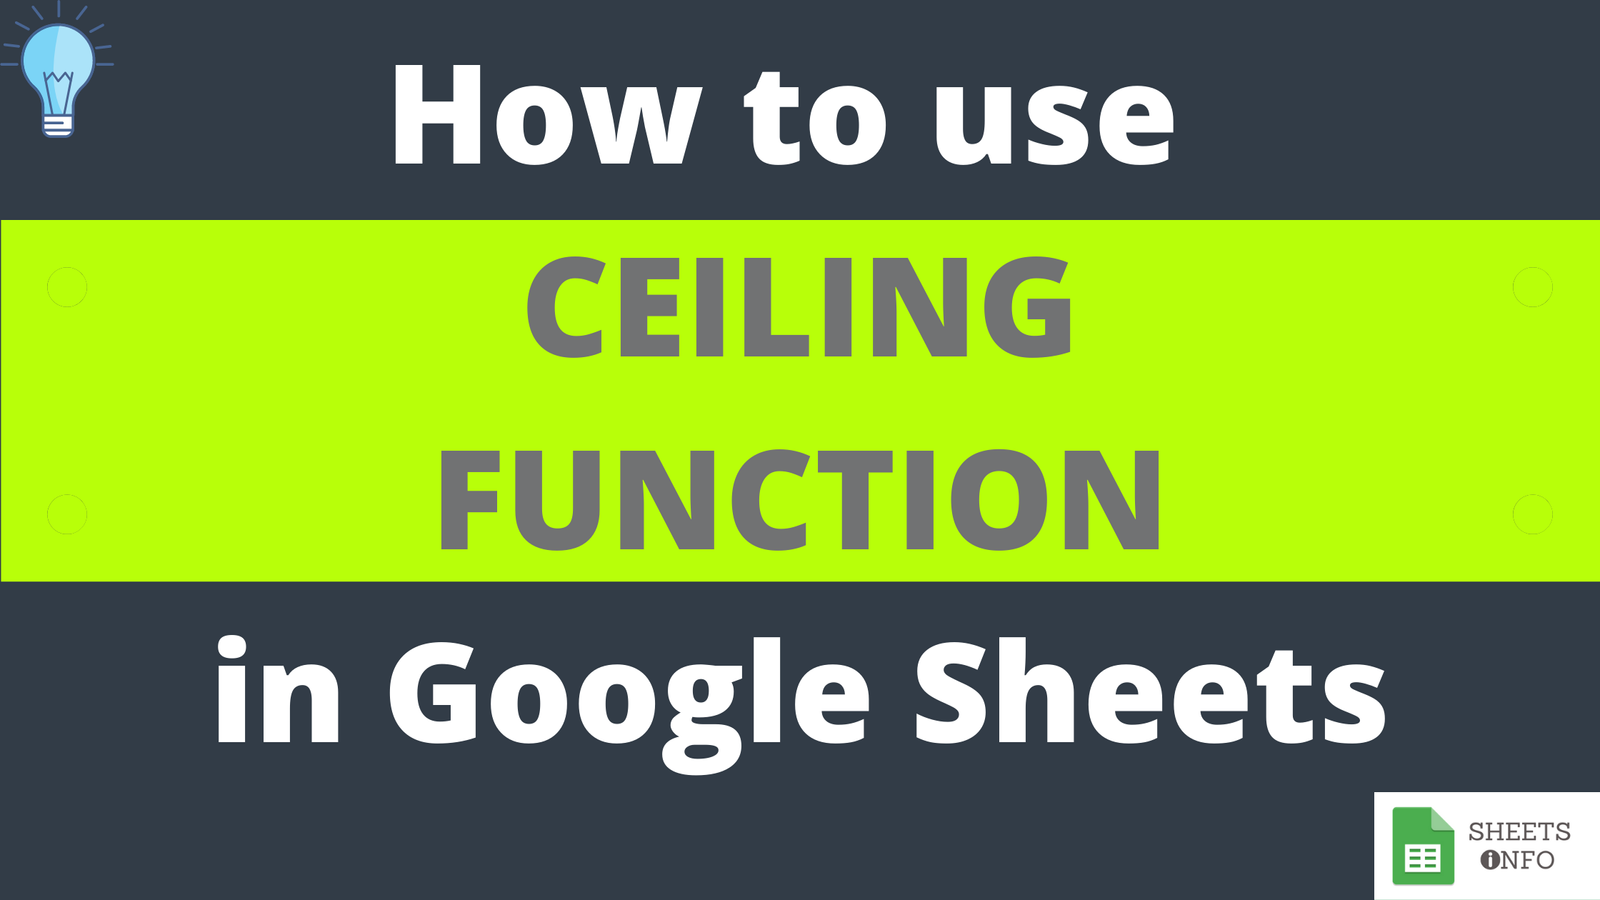 CEILING Function in Google Sheets